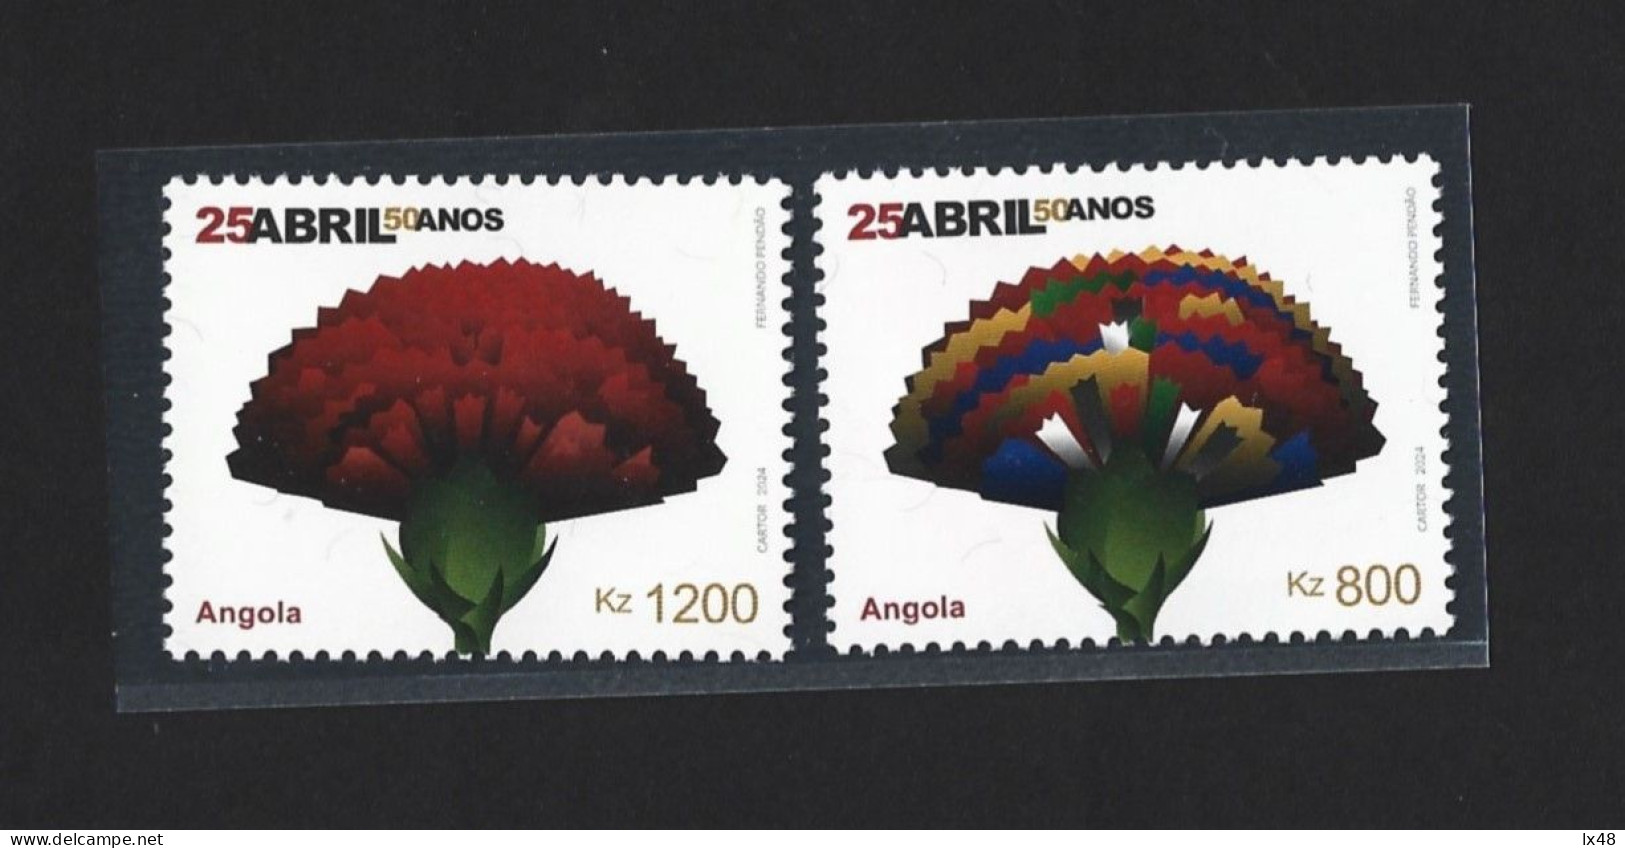 Clove. Stamps Celebrating The 50th Years 25th Of April In Portugal.Cravo. Selos Dos 50 Anos Do 25 De Abril Em Portugal - Angola